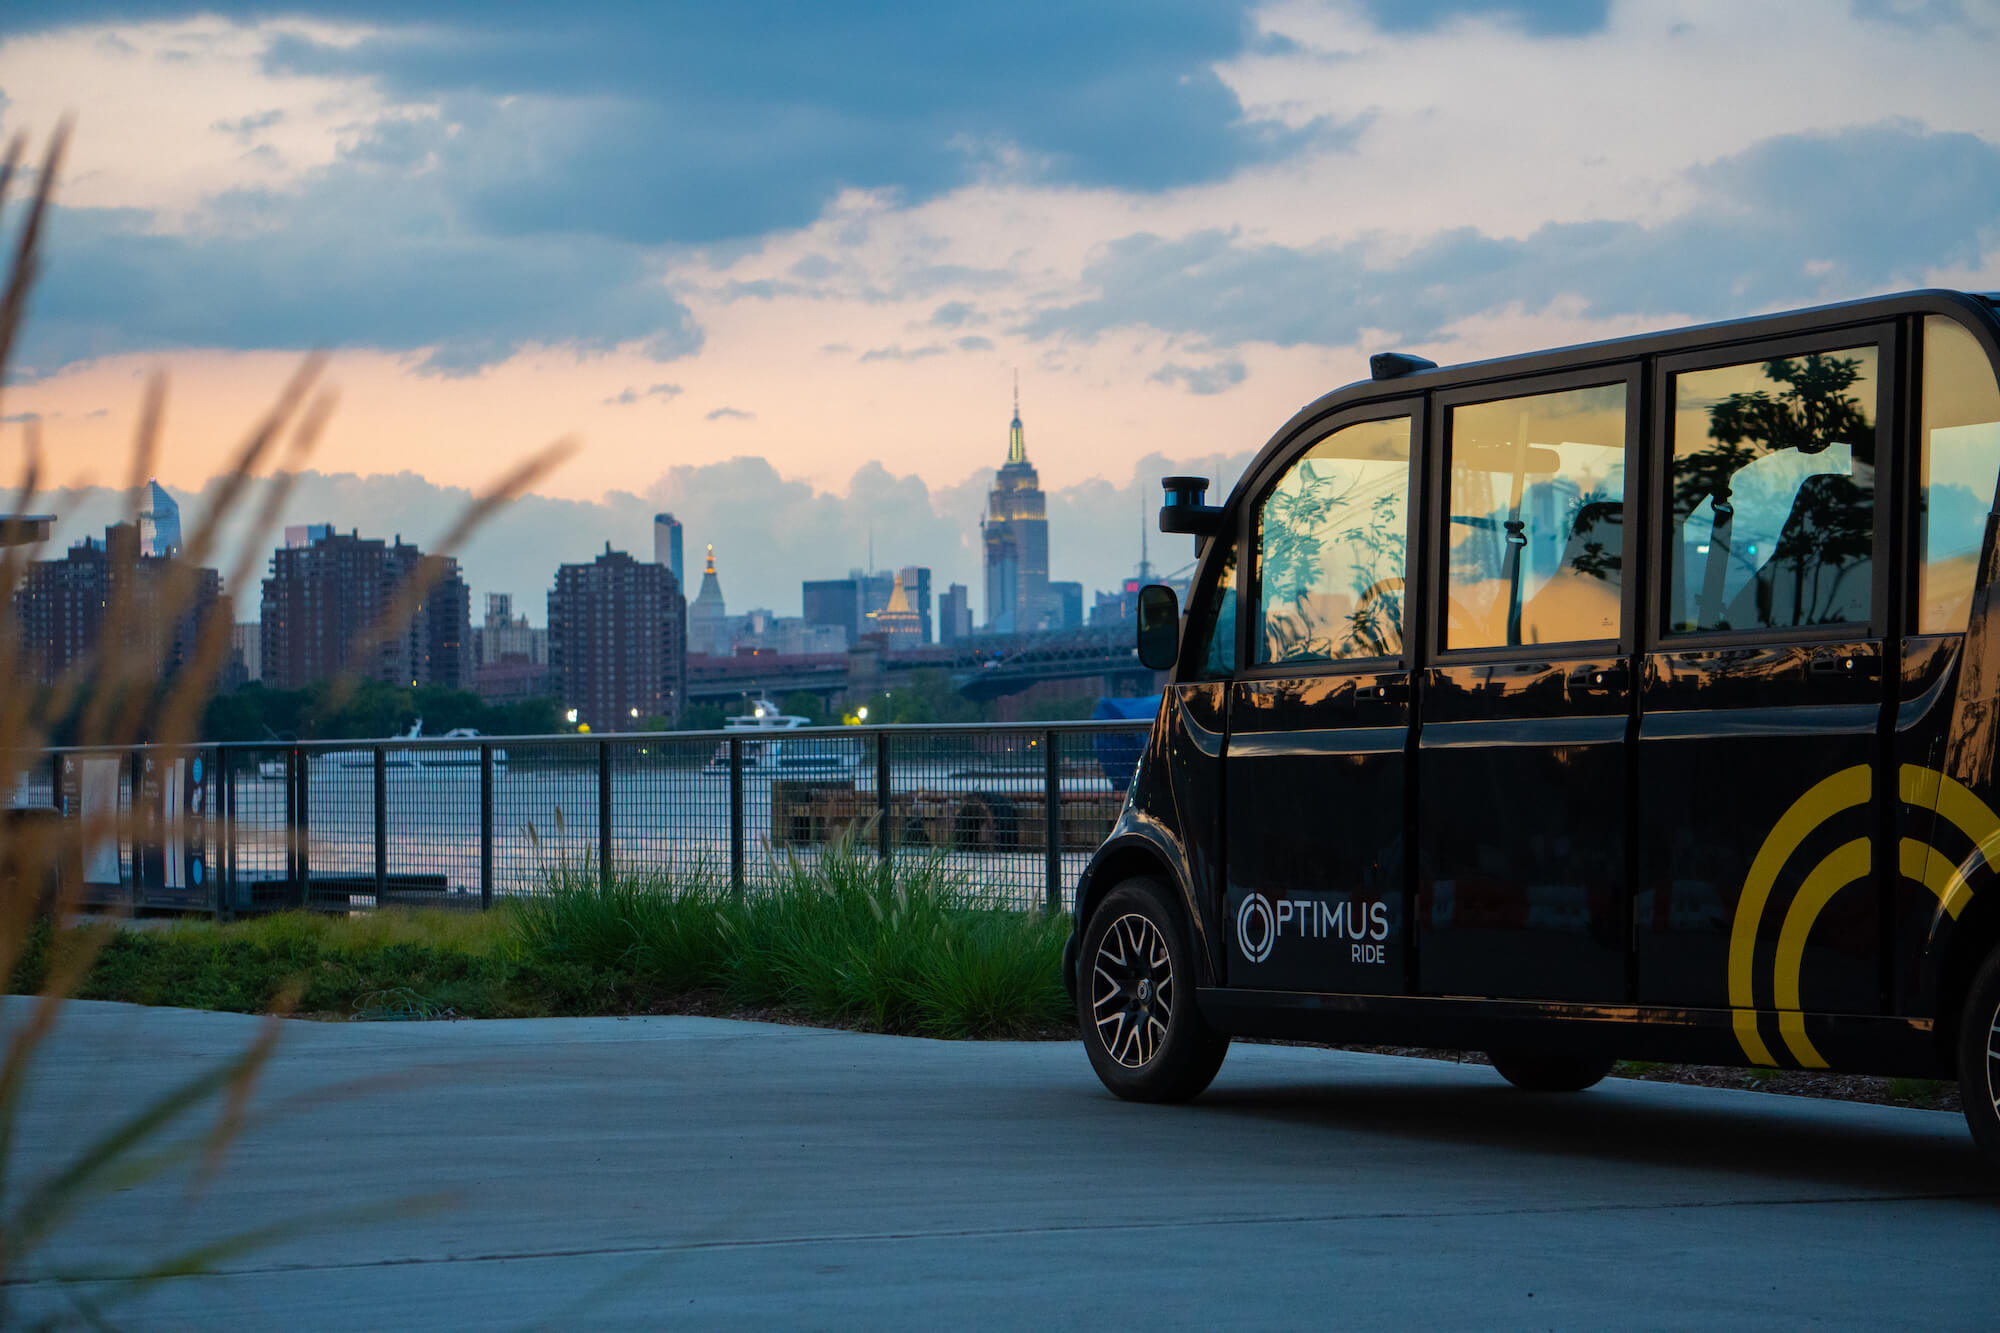 self-driving shuttle vehicle by Optimus Ride